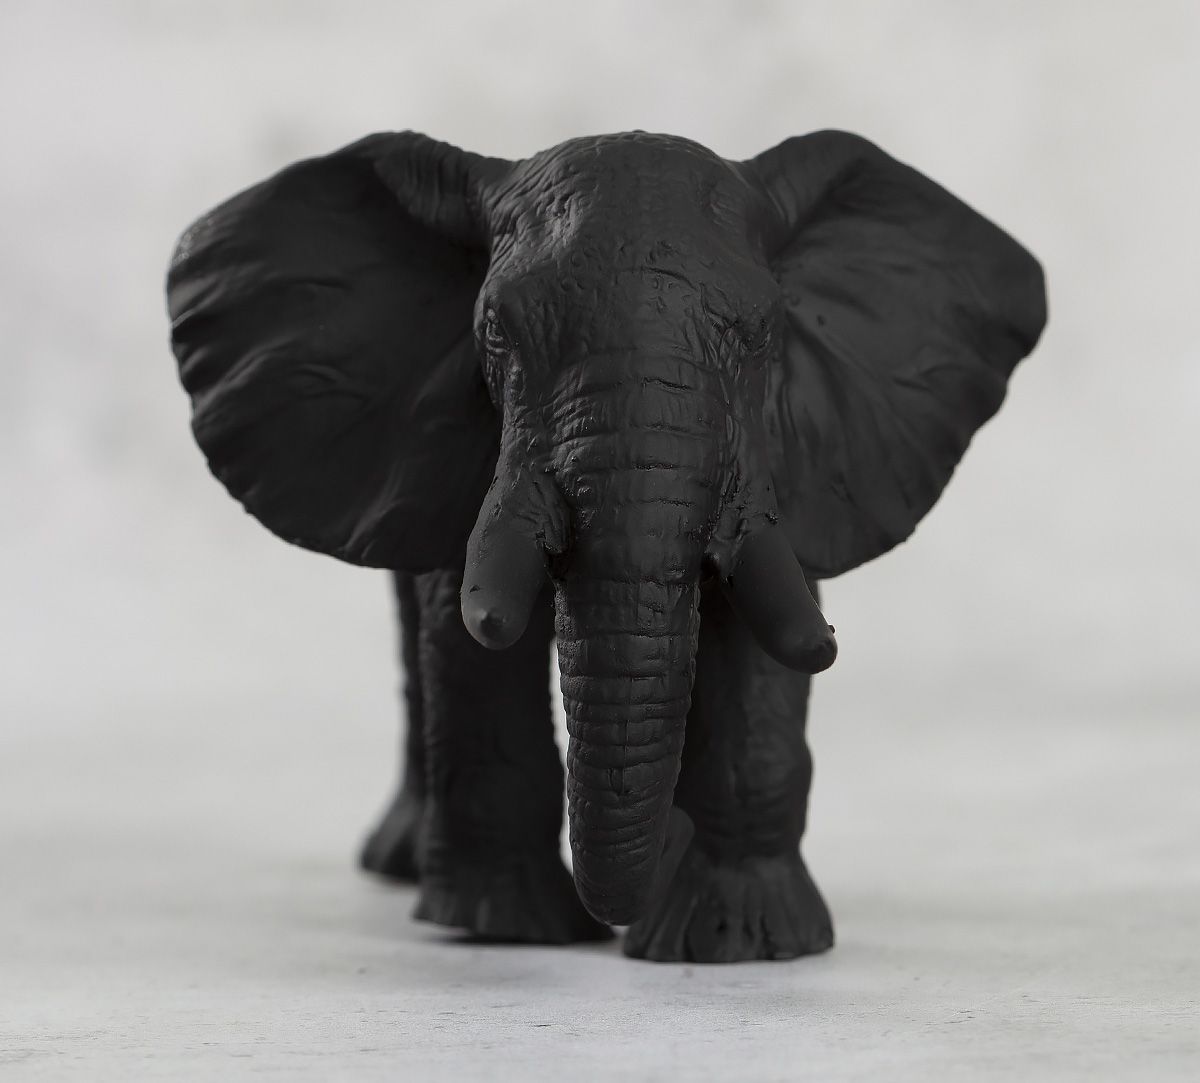 Shop for animal figurines online | India Circus